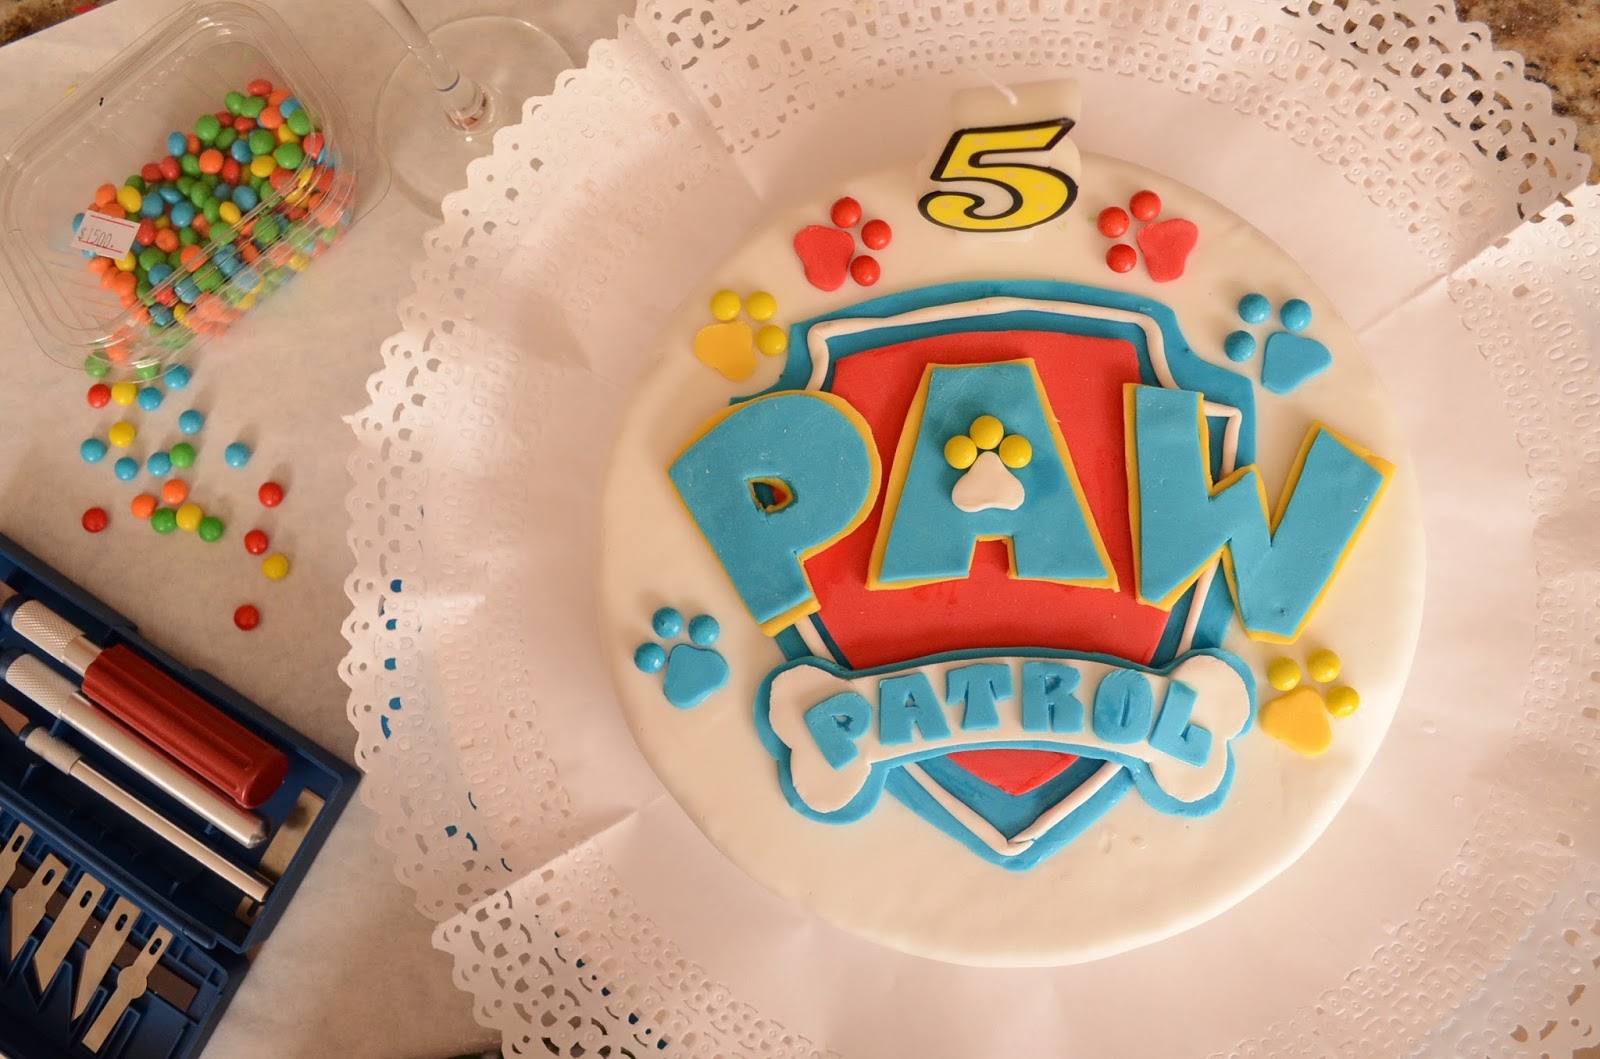 Practical Mom: Amateur Paw Patrol Cake, from scratch! 